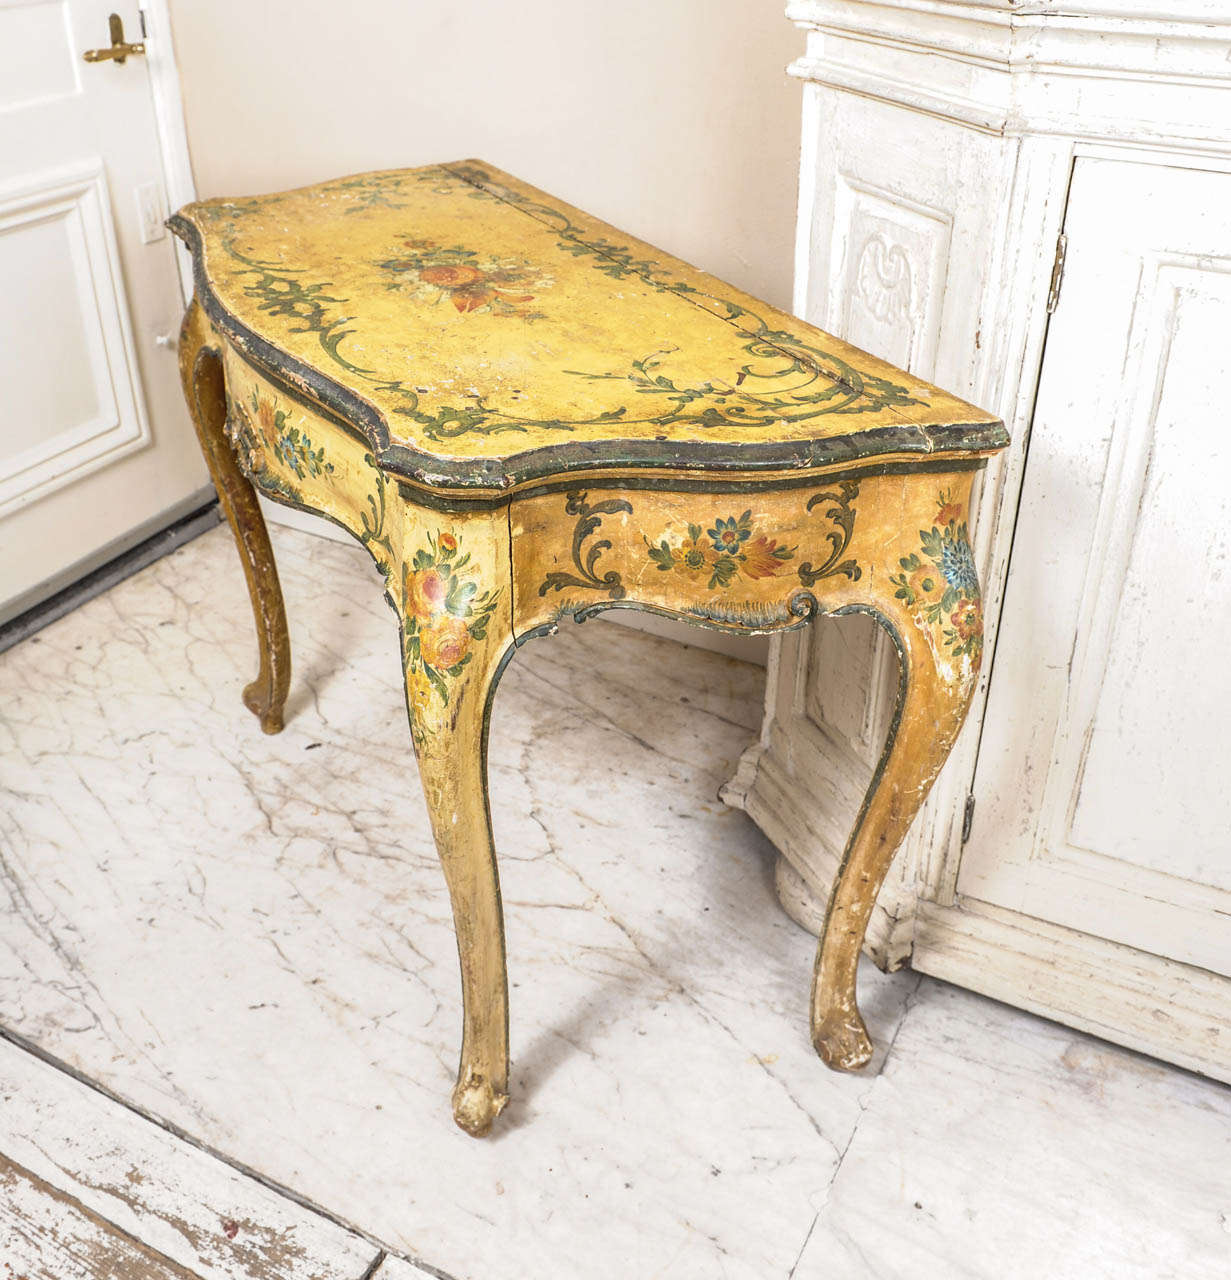 Very elegant Italian Side table, also used as a Poudreusse, painted in yellow with floral decorativs, with inside a mirror.